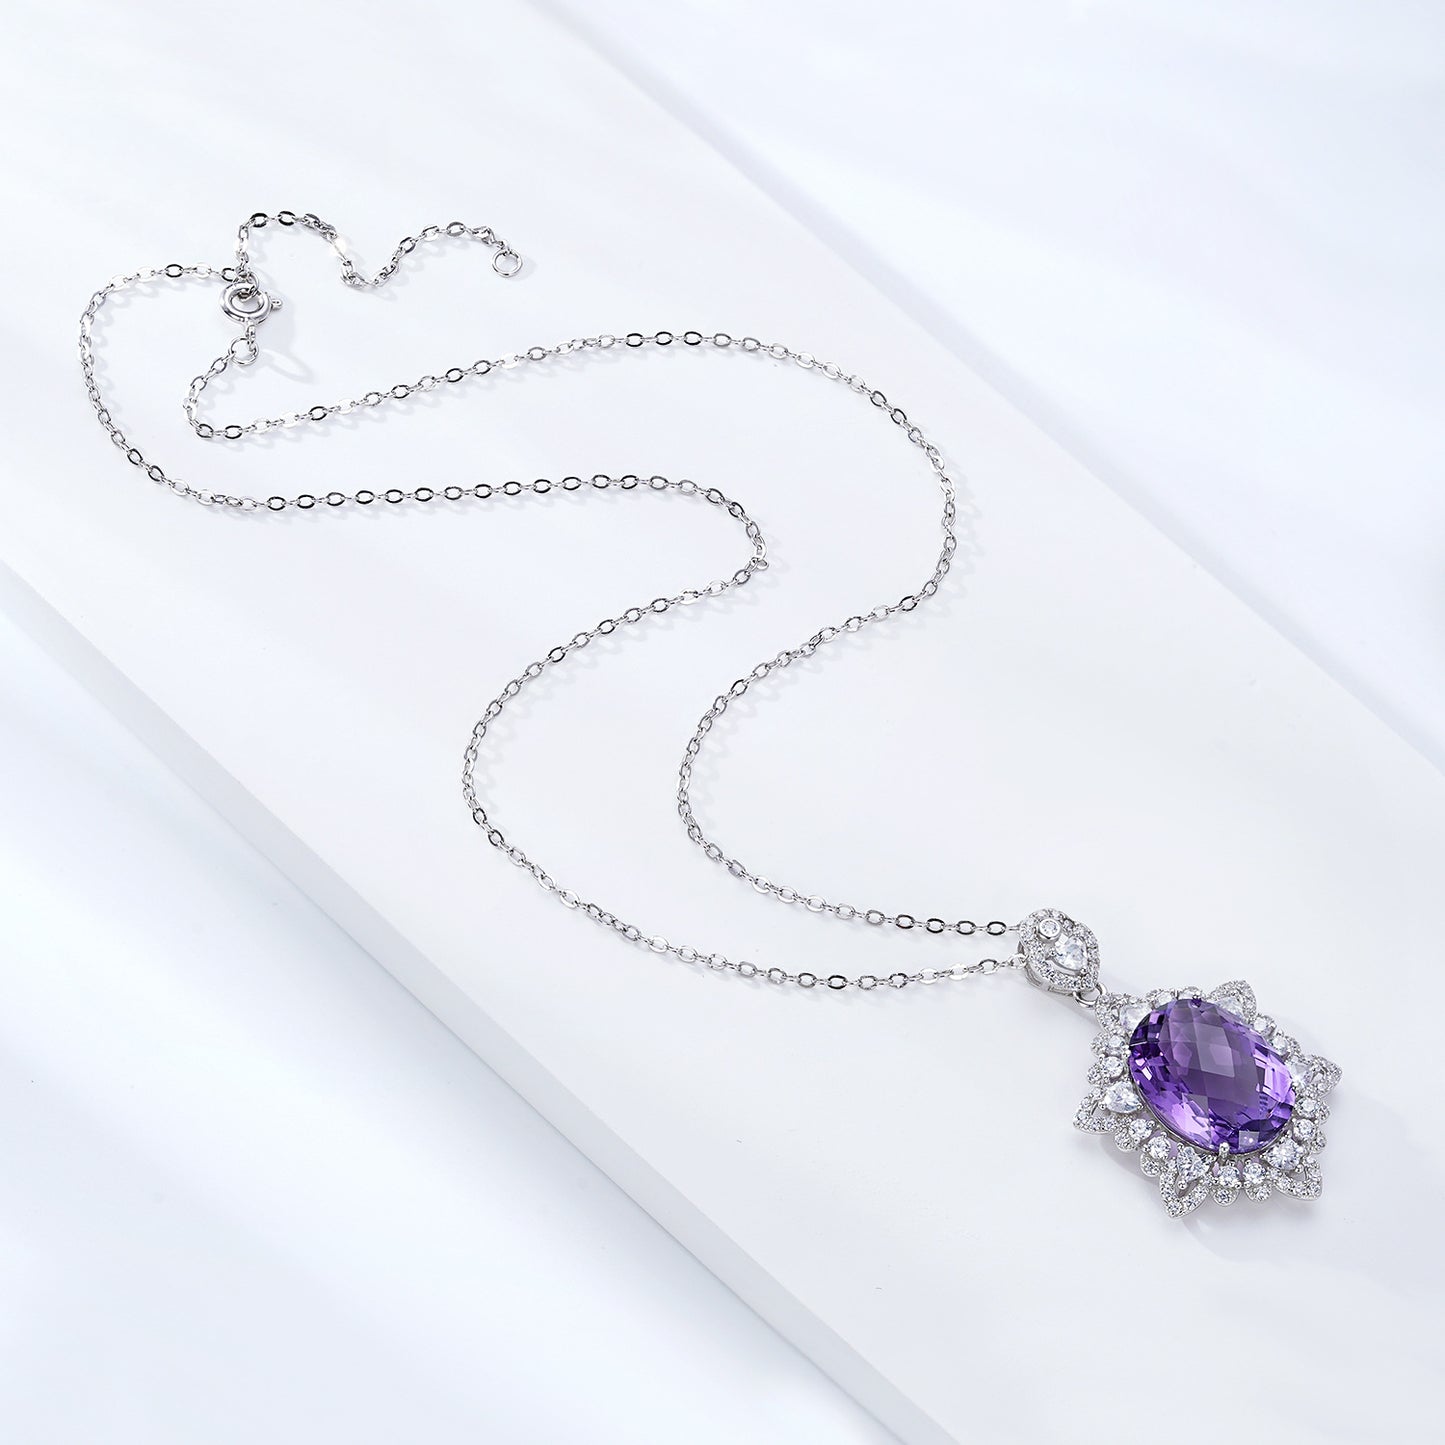 Natural Amethyst Necklace Women's 925 Silver